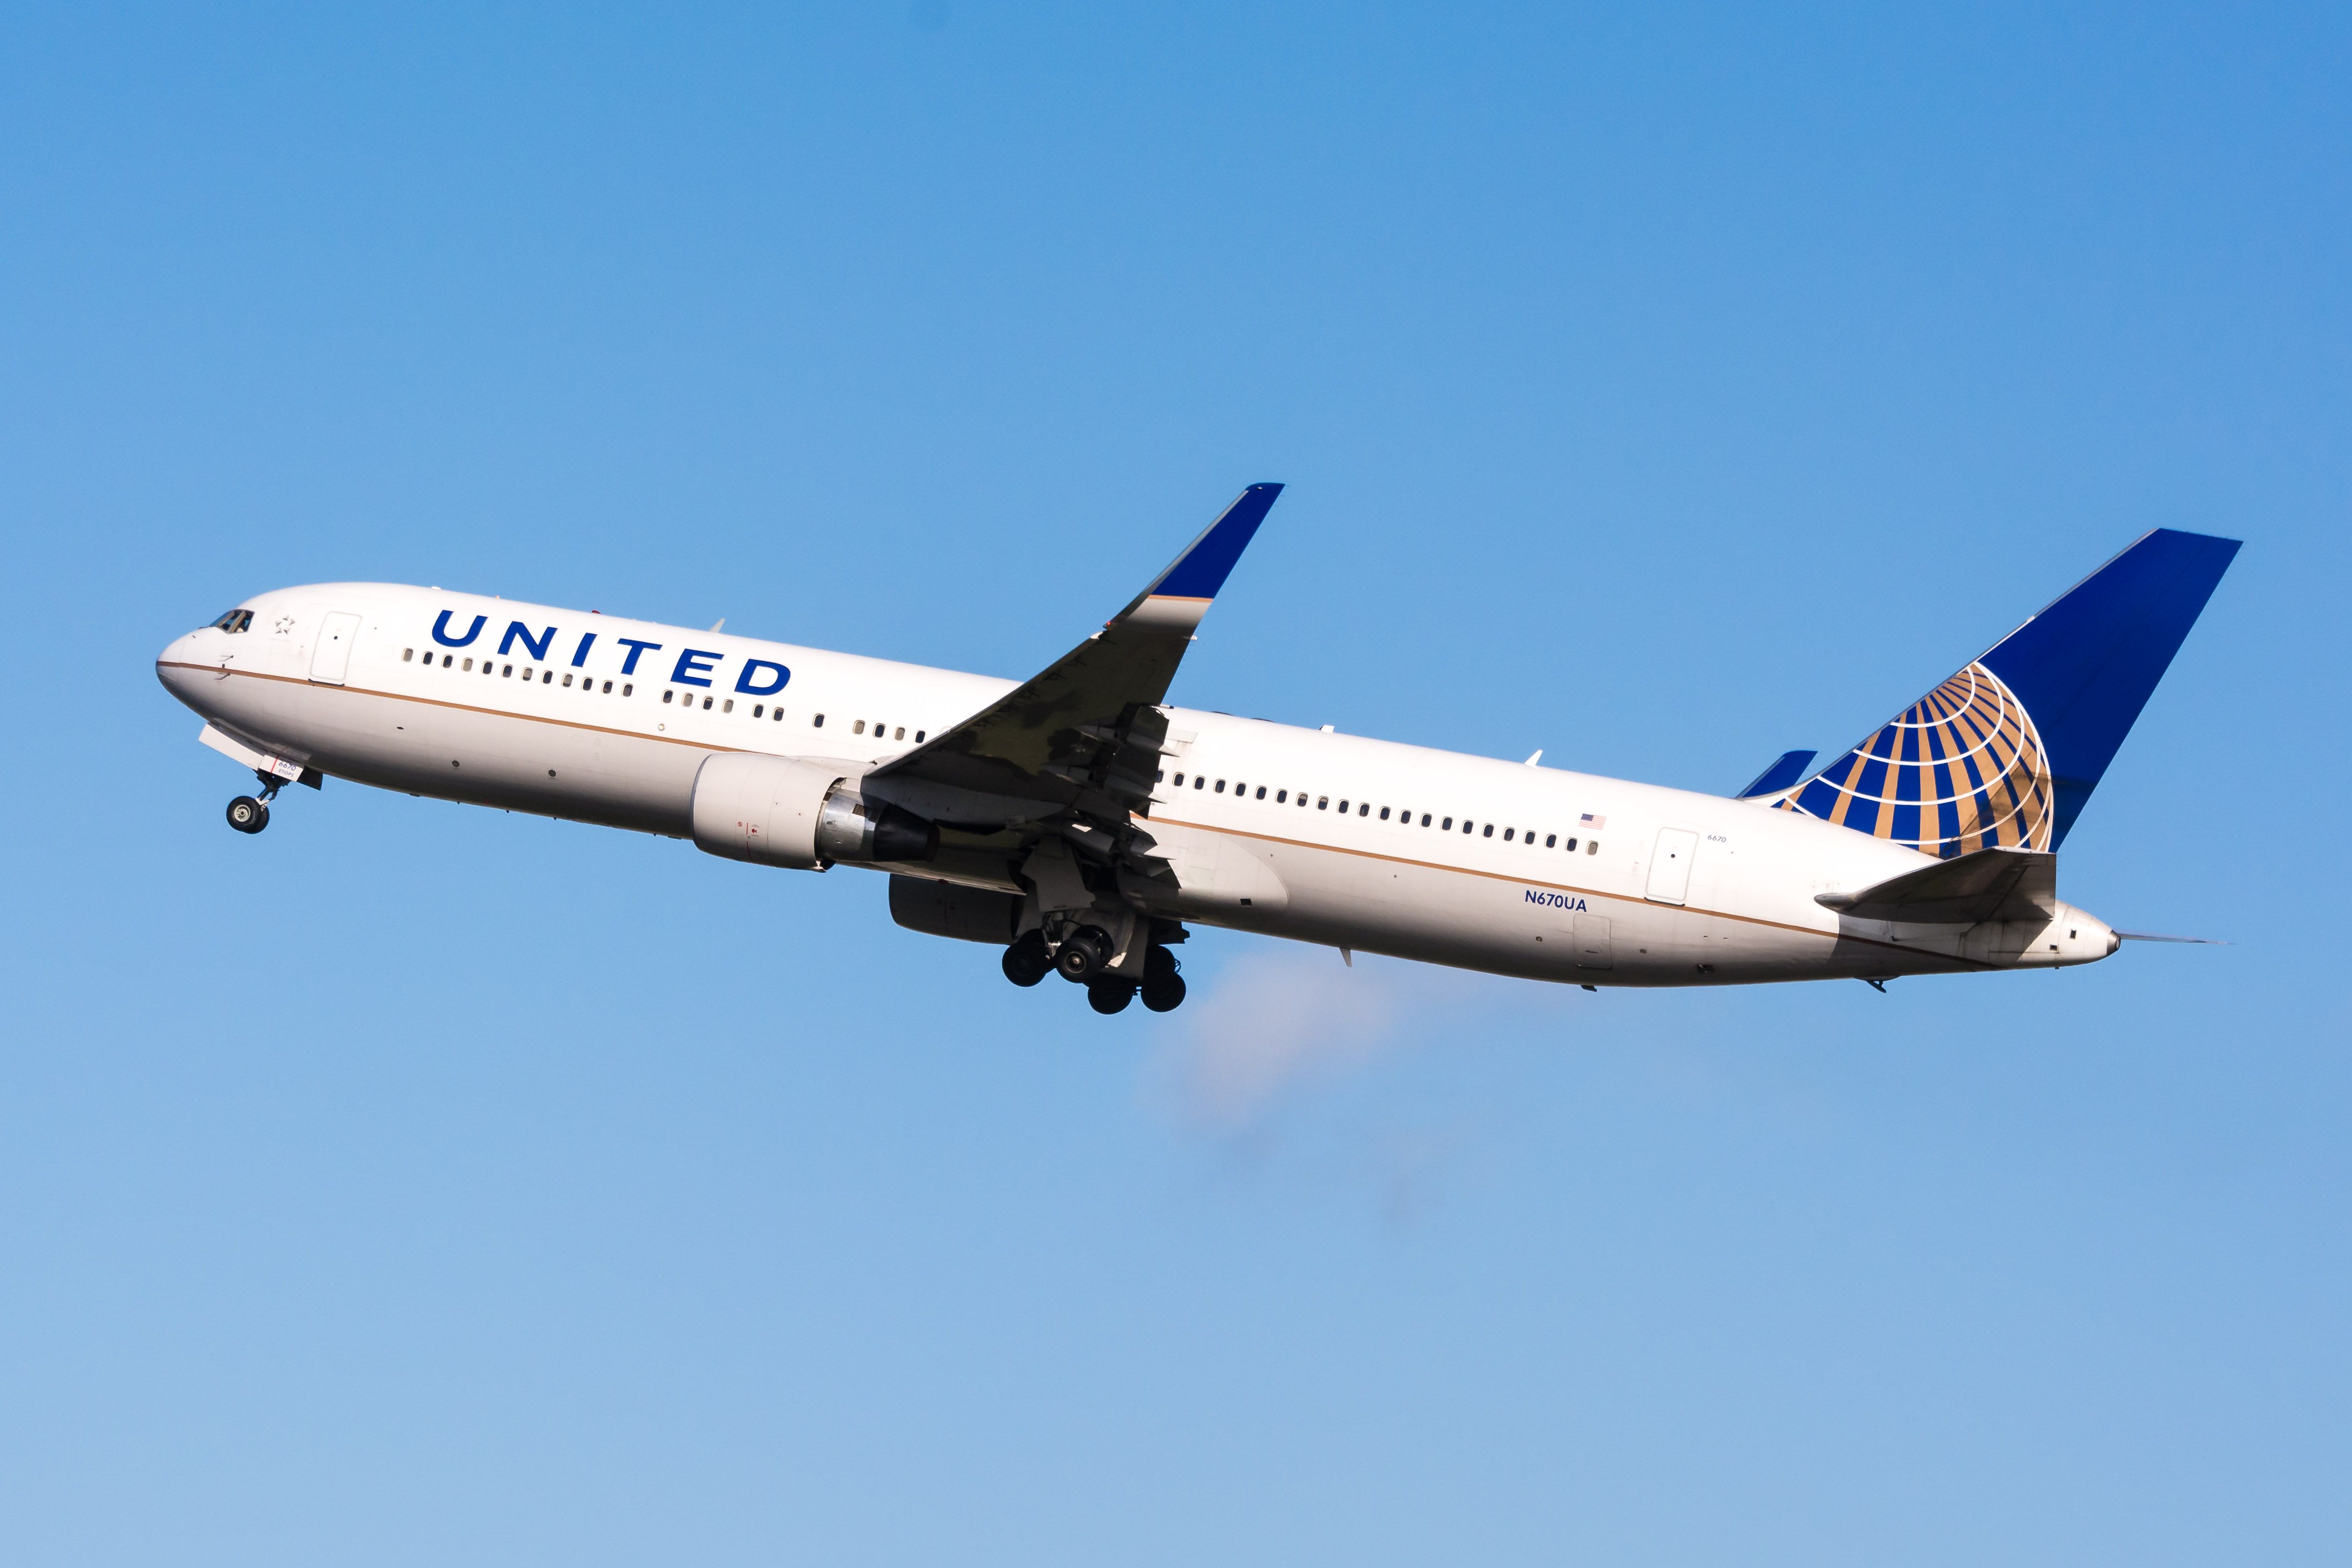 Tire falls off United Airlines Boeing 777 plane takeoff from San